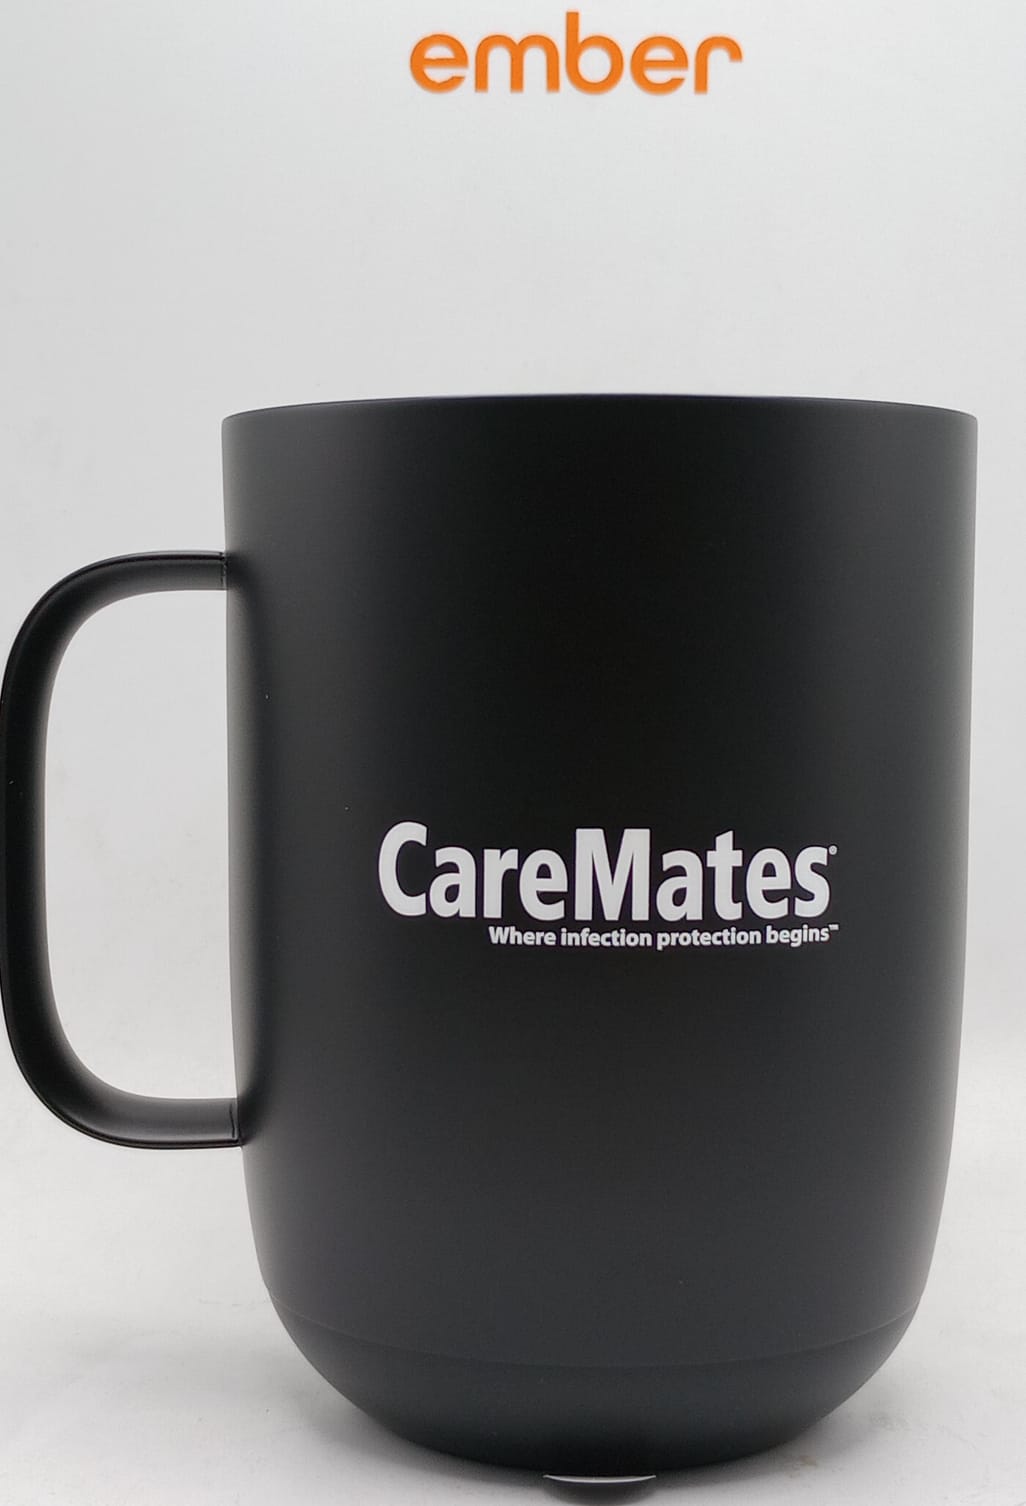 Elevate Your Coffee Experience with the 14 oz Ember Mug – Second Generation